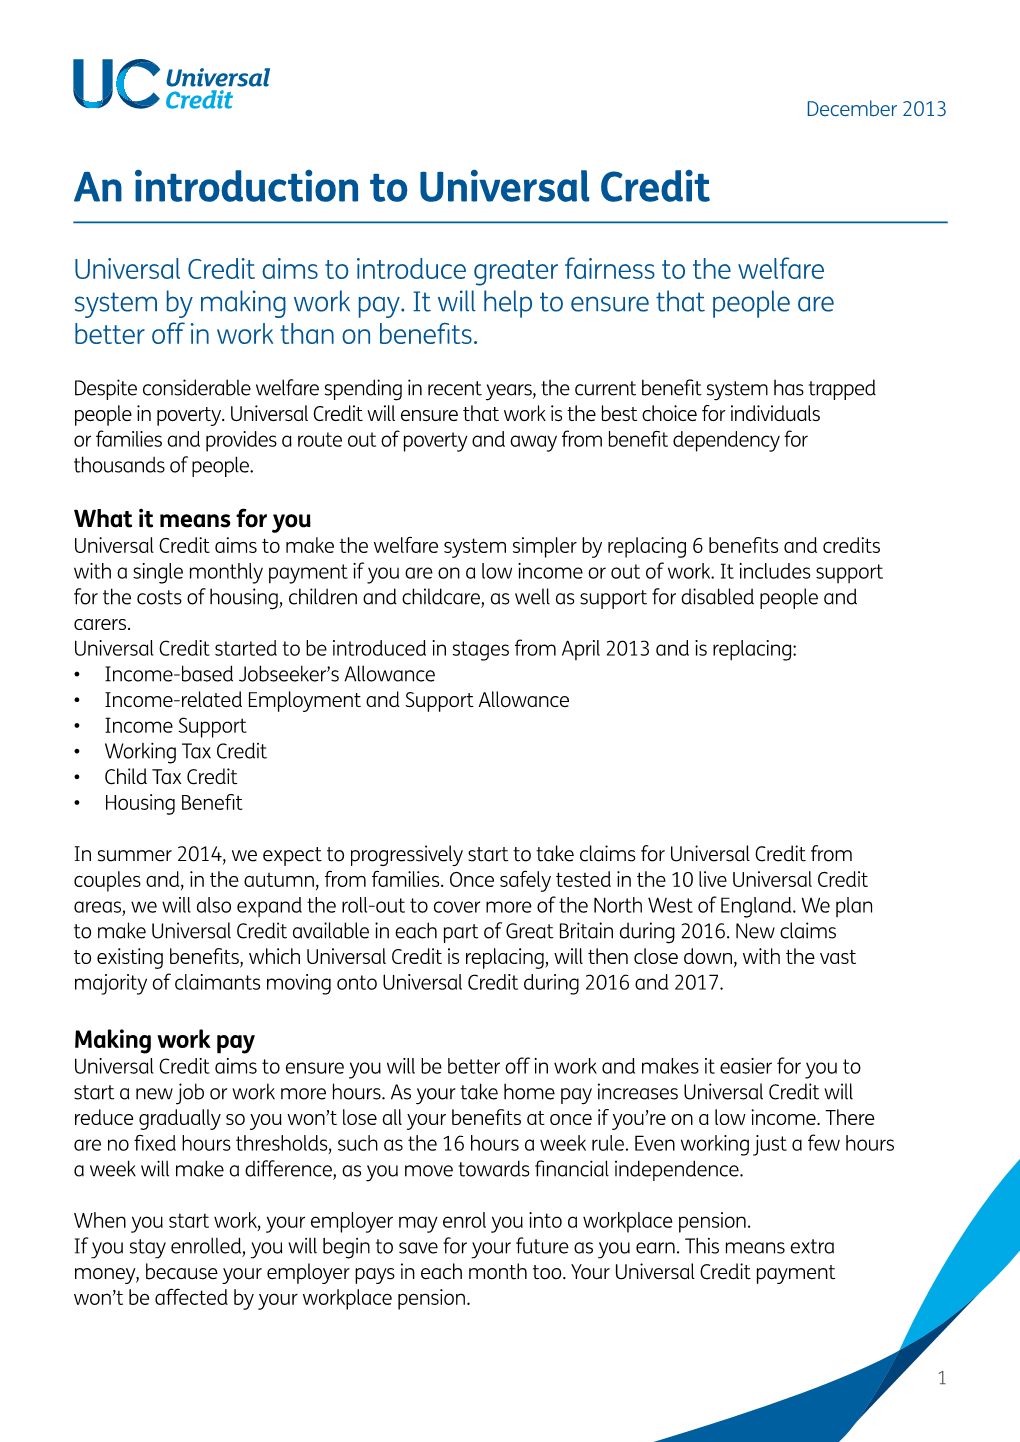 An Introduction to Universal Credit